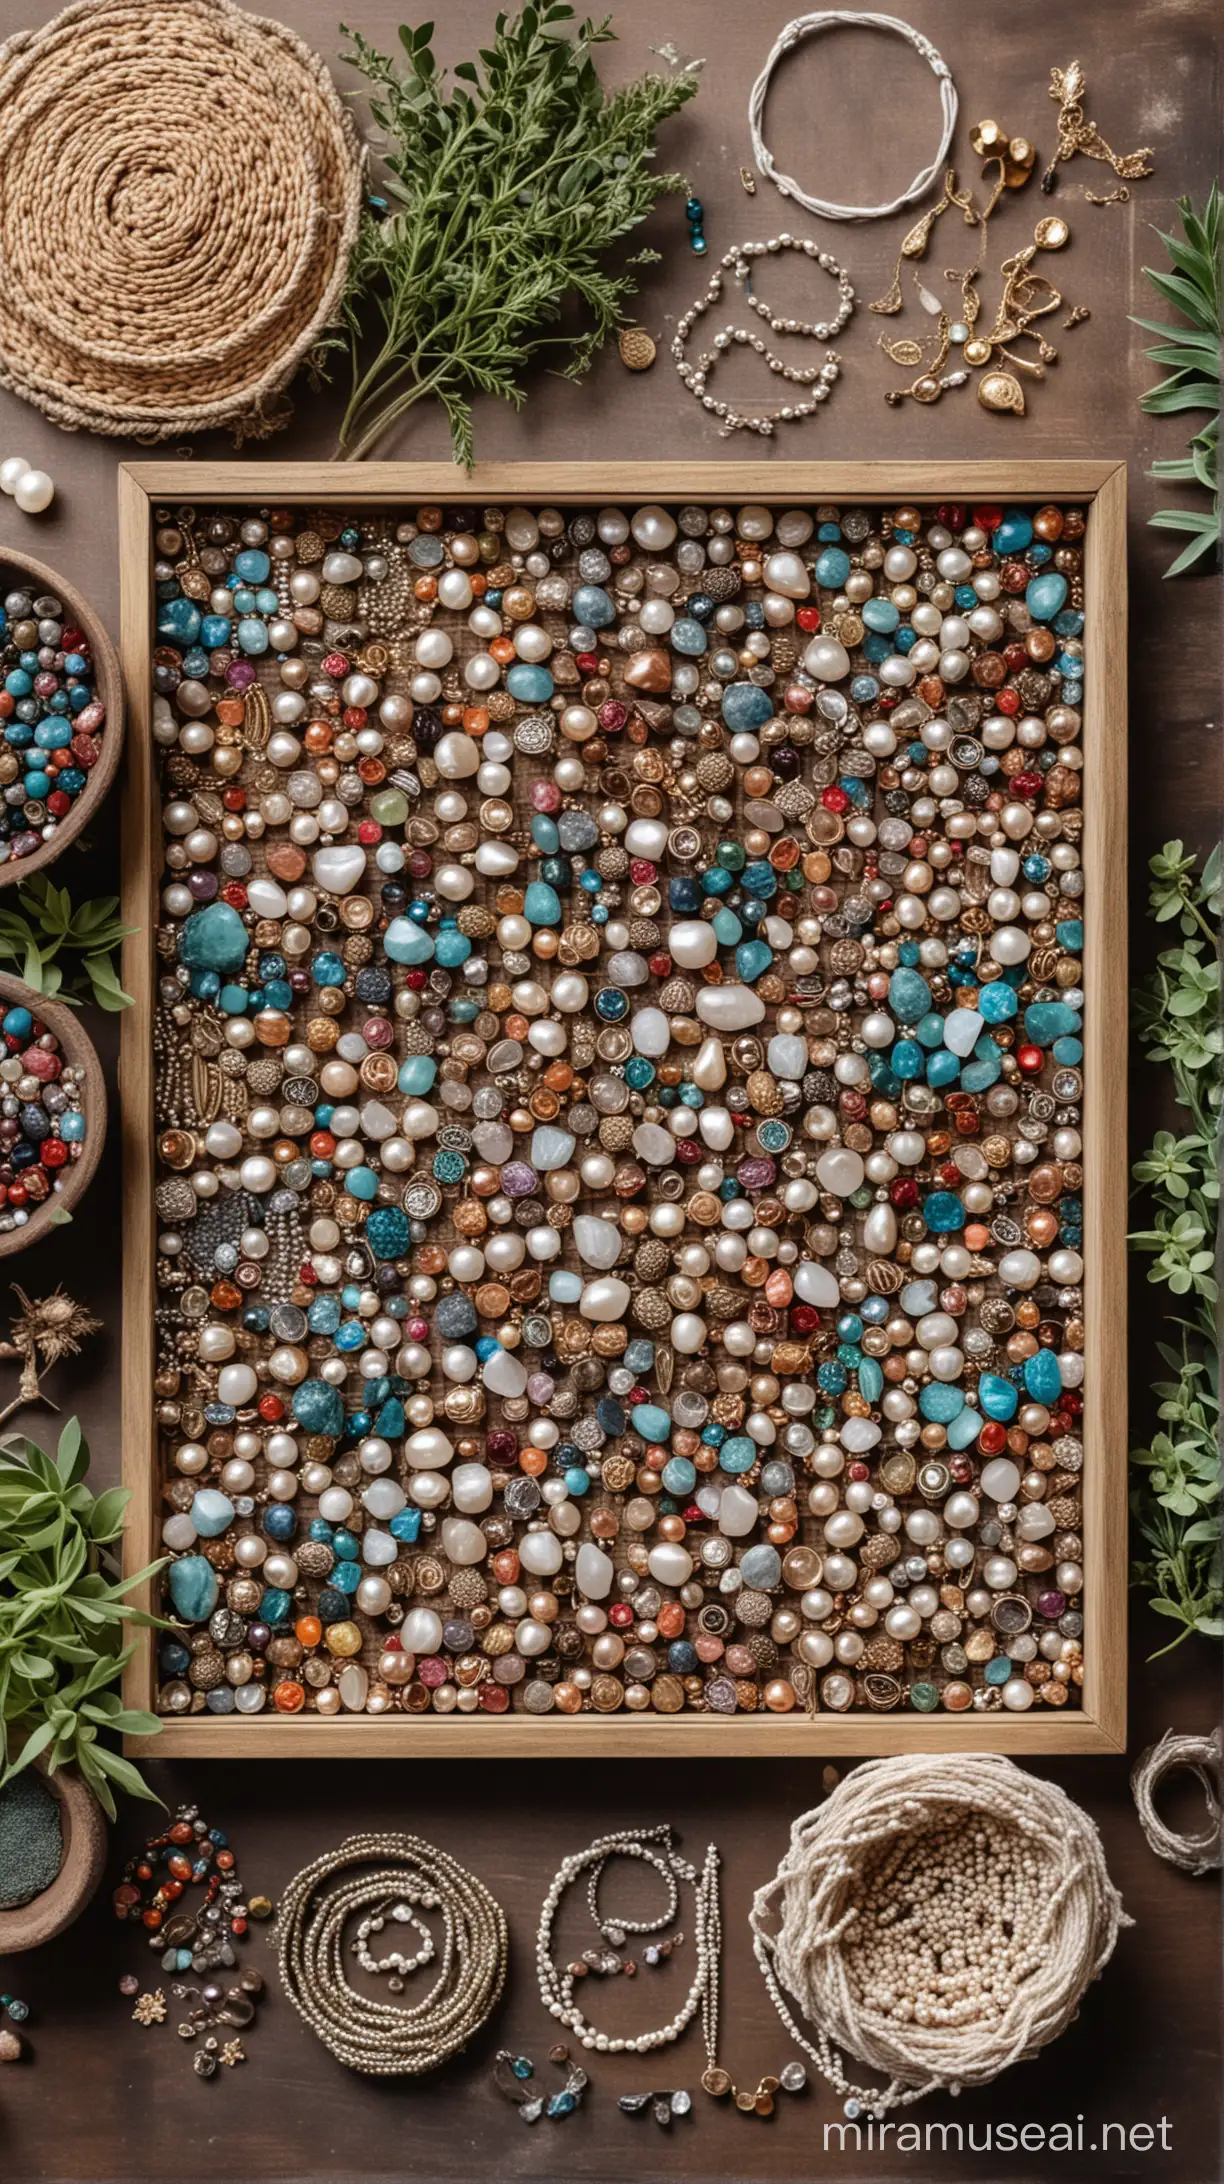 a real photo. top down. table full of jewelrys, earrings, bracelets. boxes and few plantes. A work table for jewelrys, pearls and beads for jewelry making. Colorful. boho style

